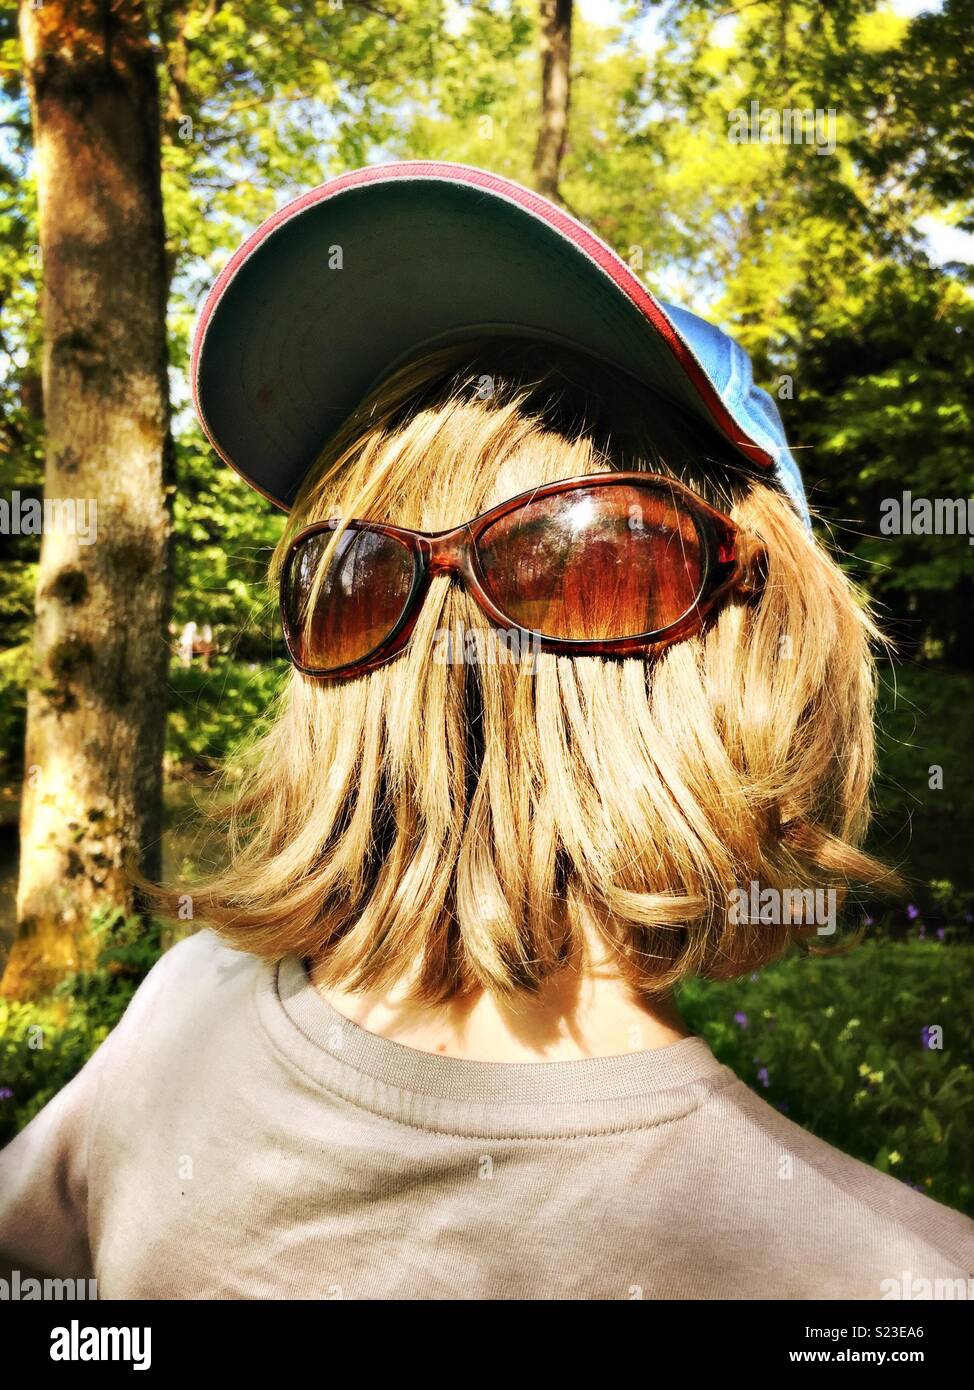 Hairy face with sunglasses resembling Chewbacca. Stock Photo